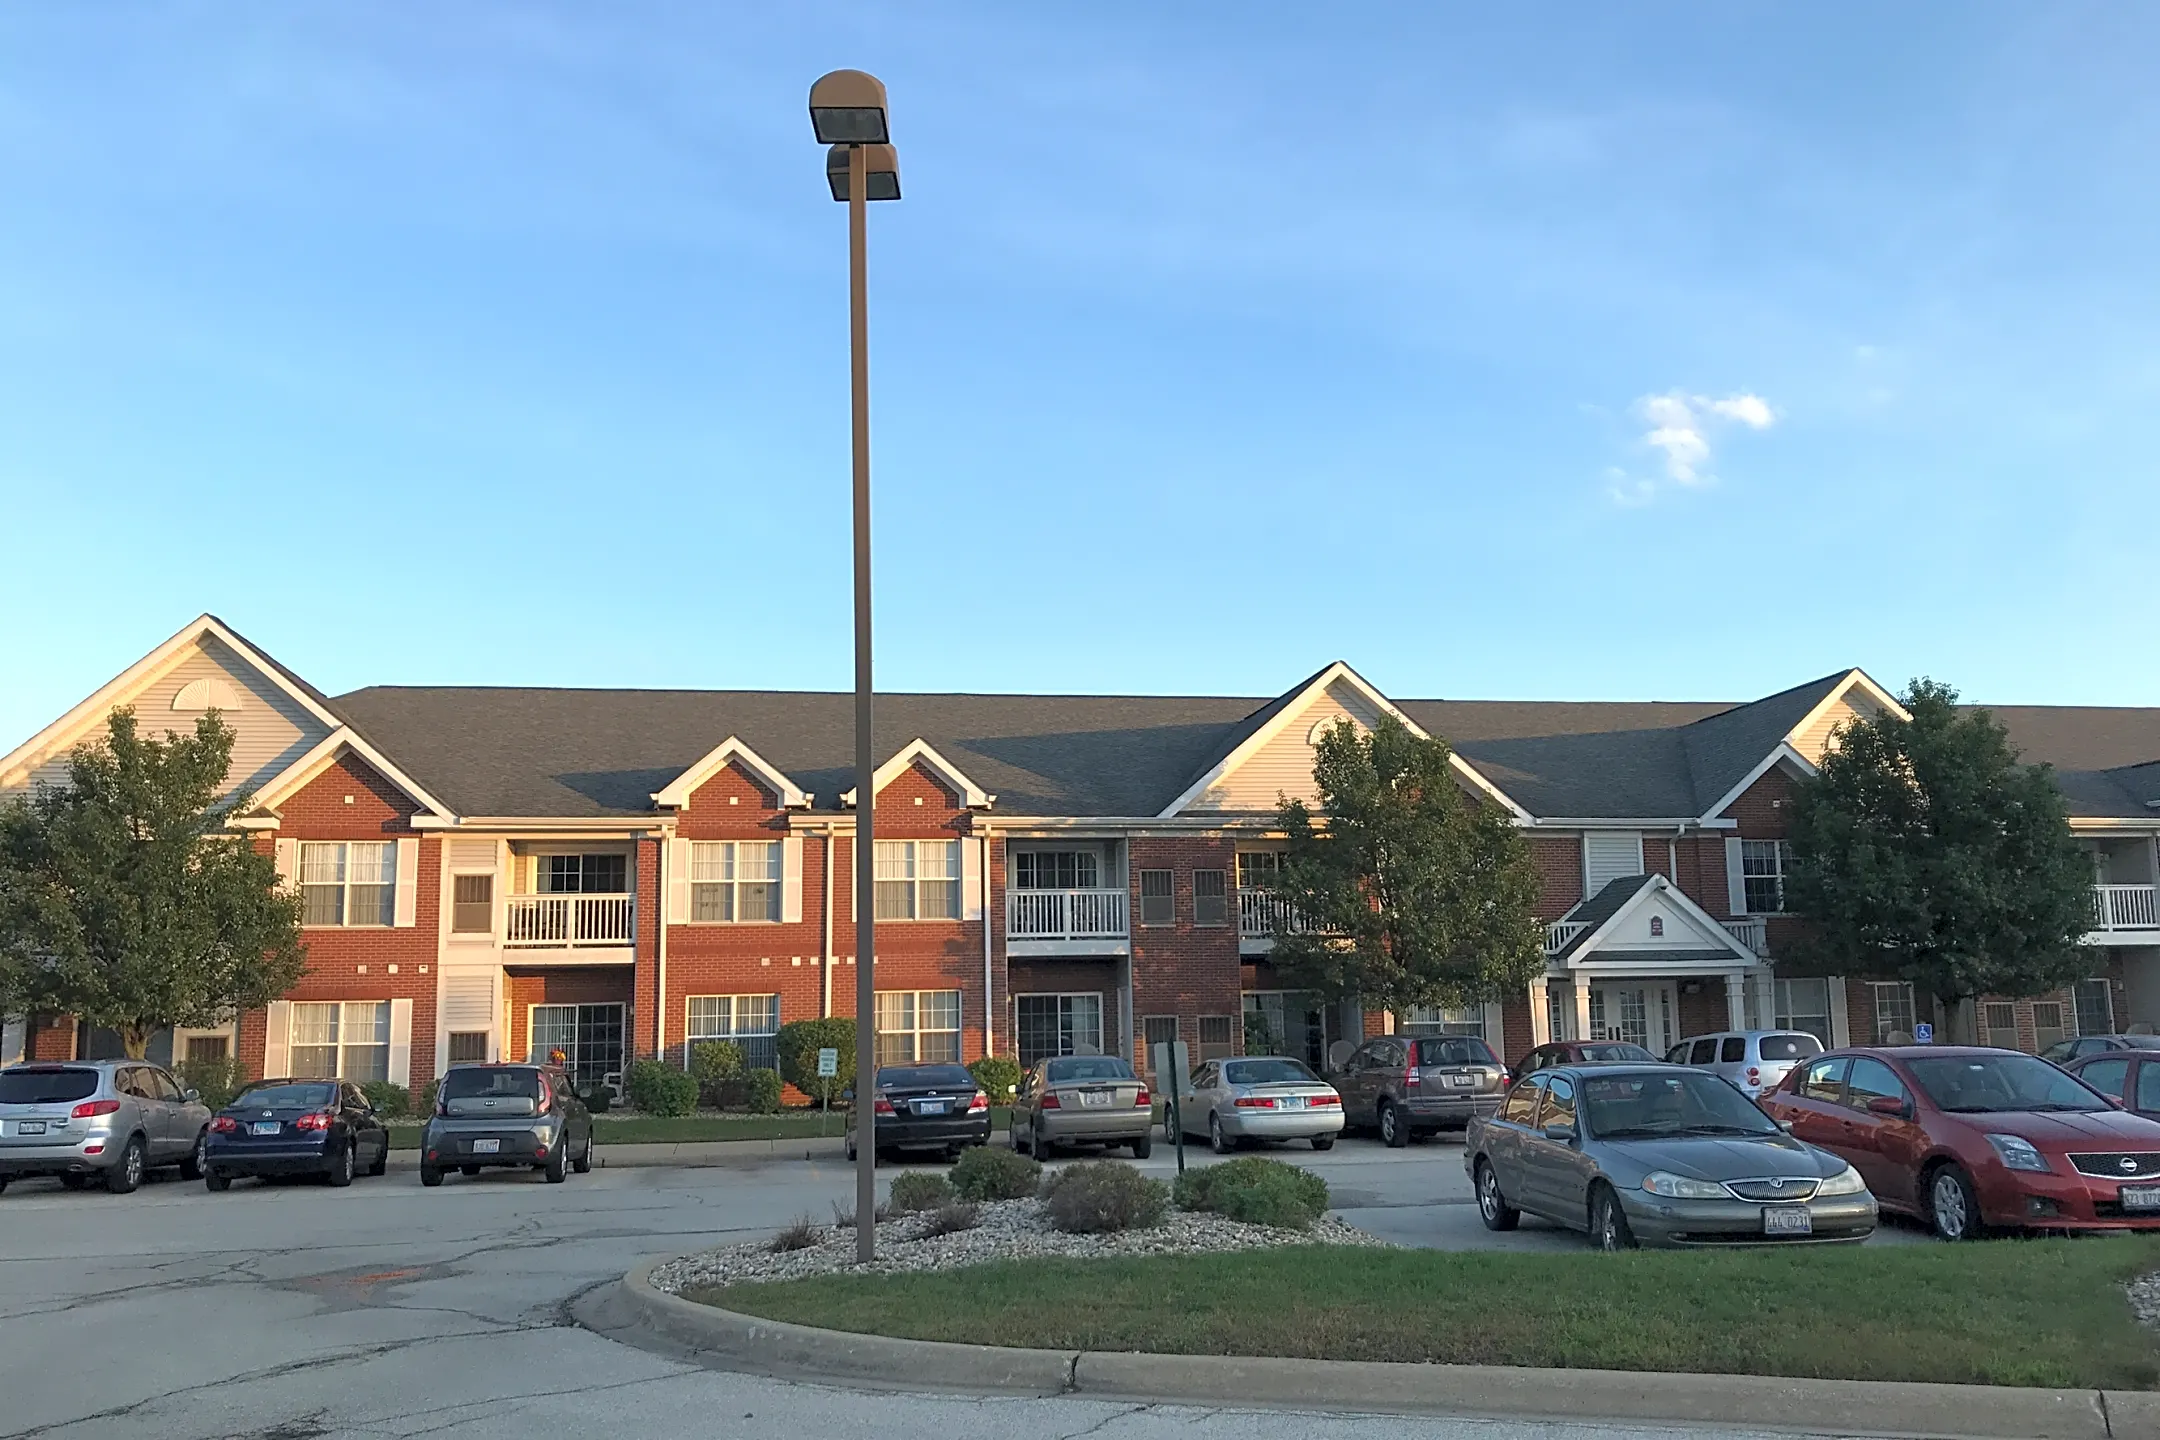 Pool - Myers Commons Apartments - Darien, IL